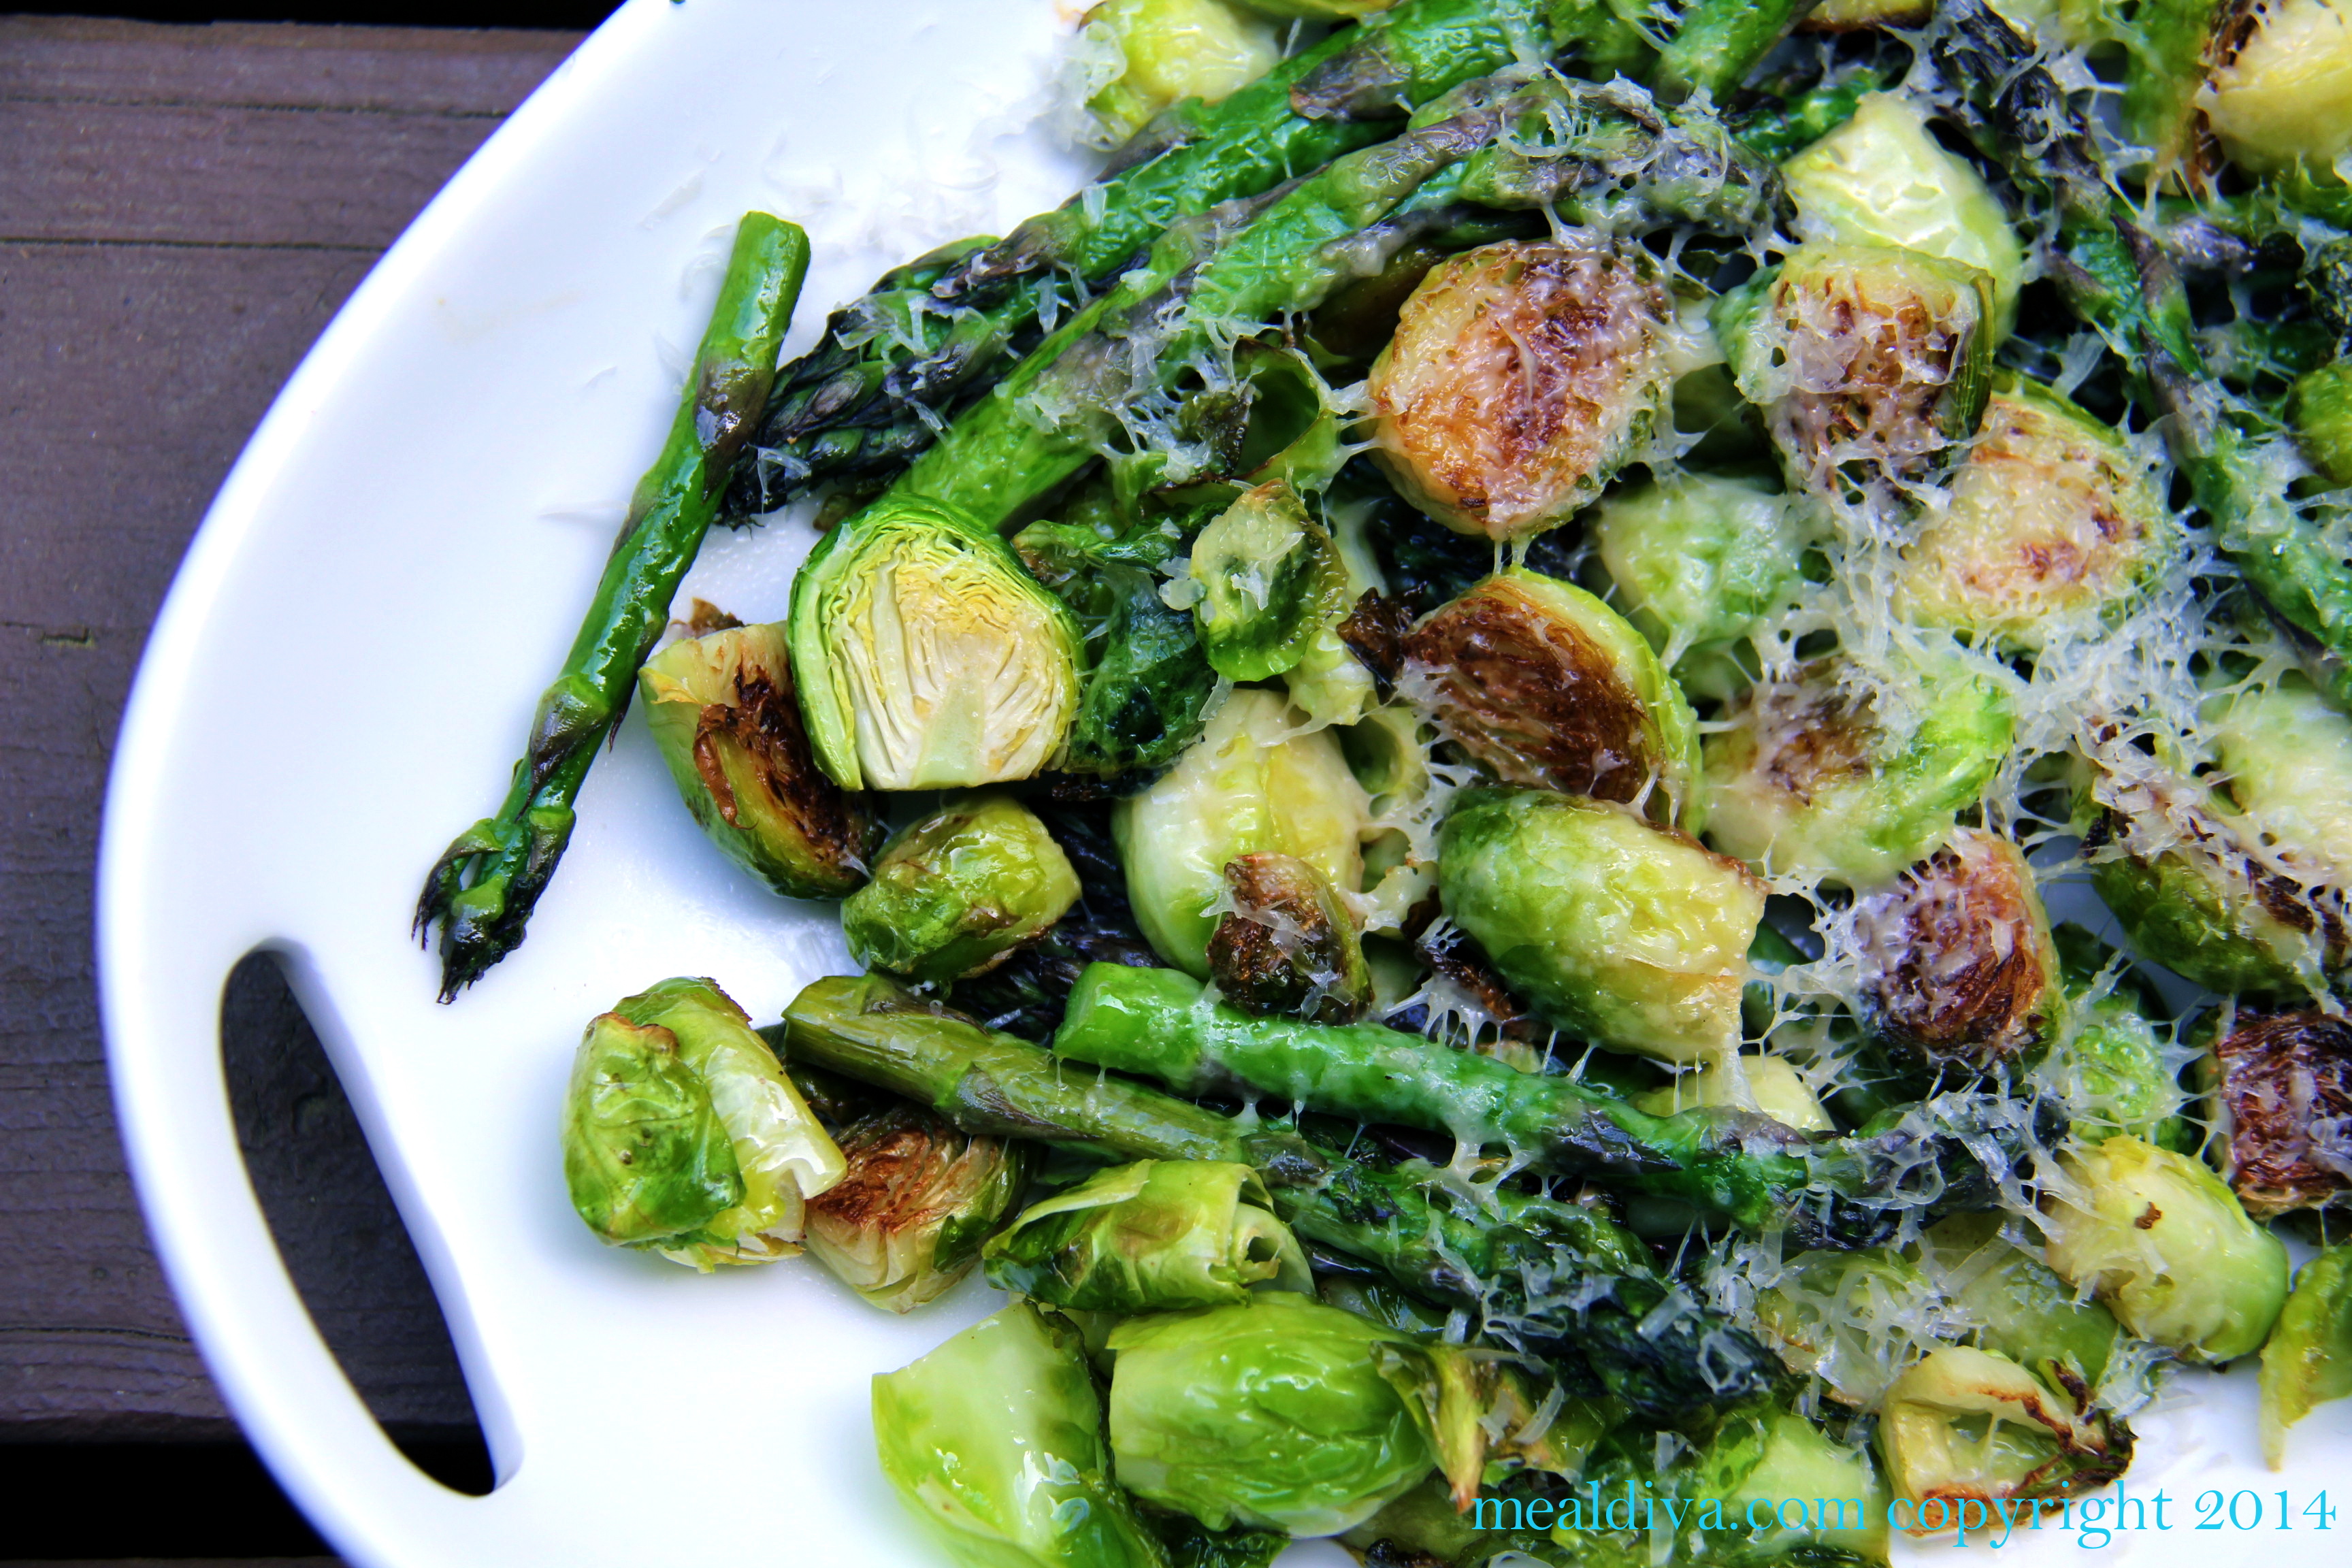 Easy Baked Asparagus & Brussel Sprouts